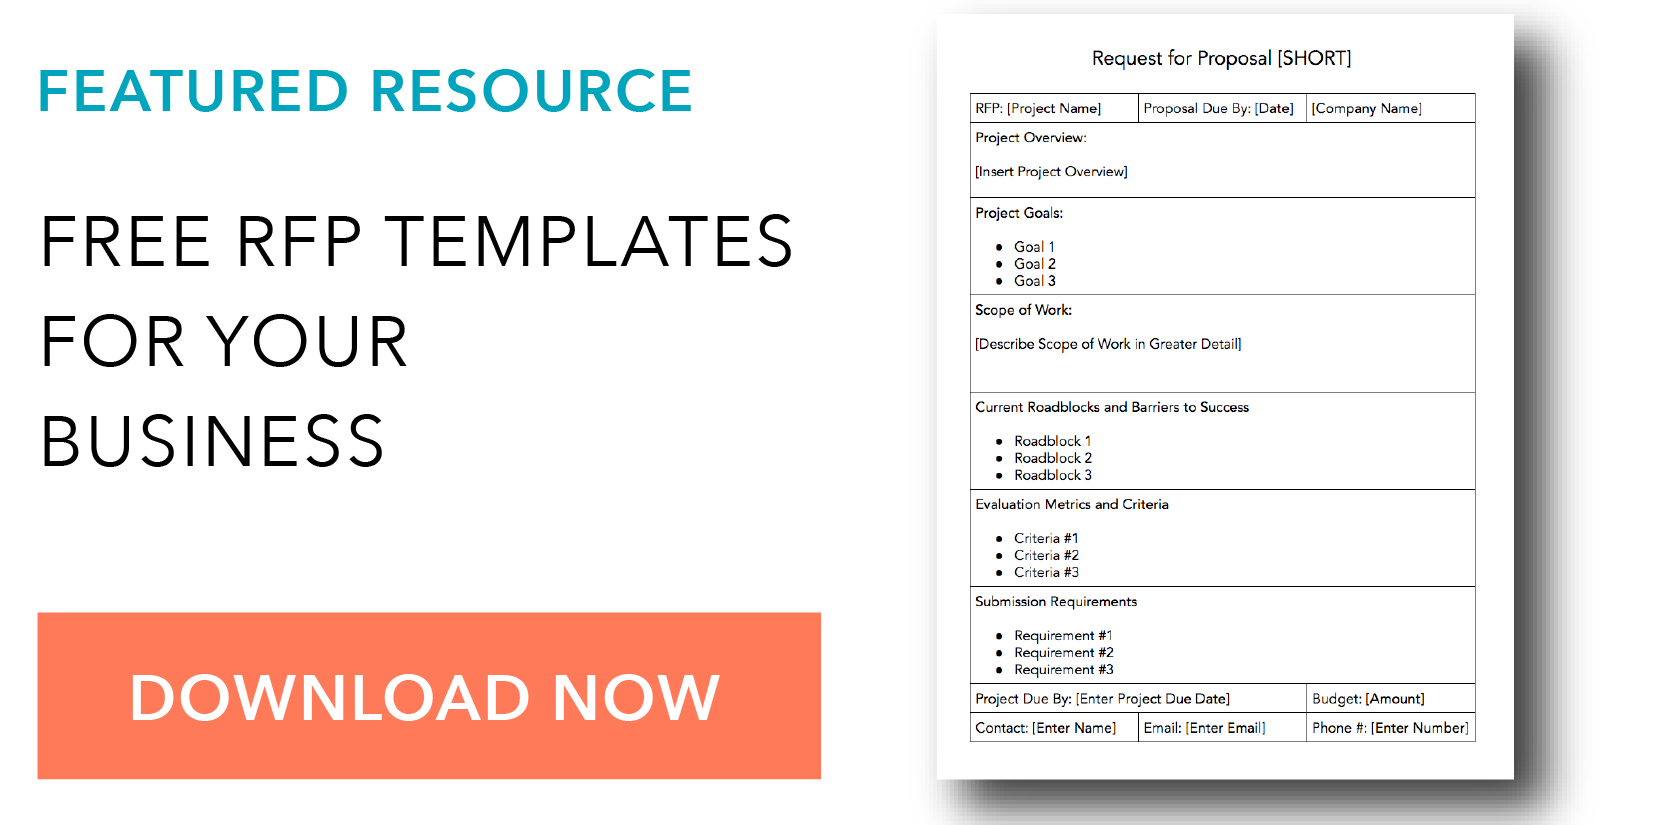 How to Write a Request for Proposal with Template and Sample